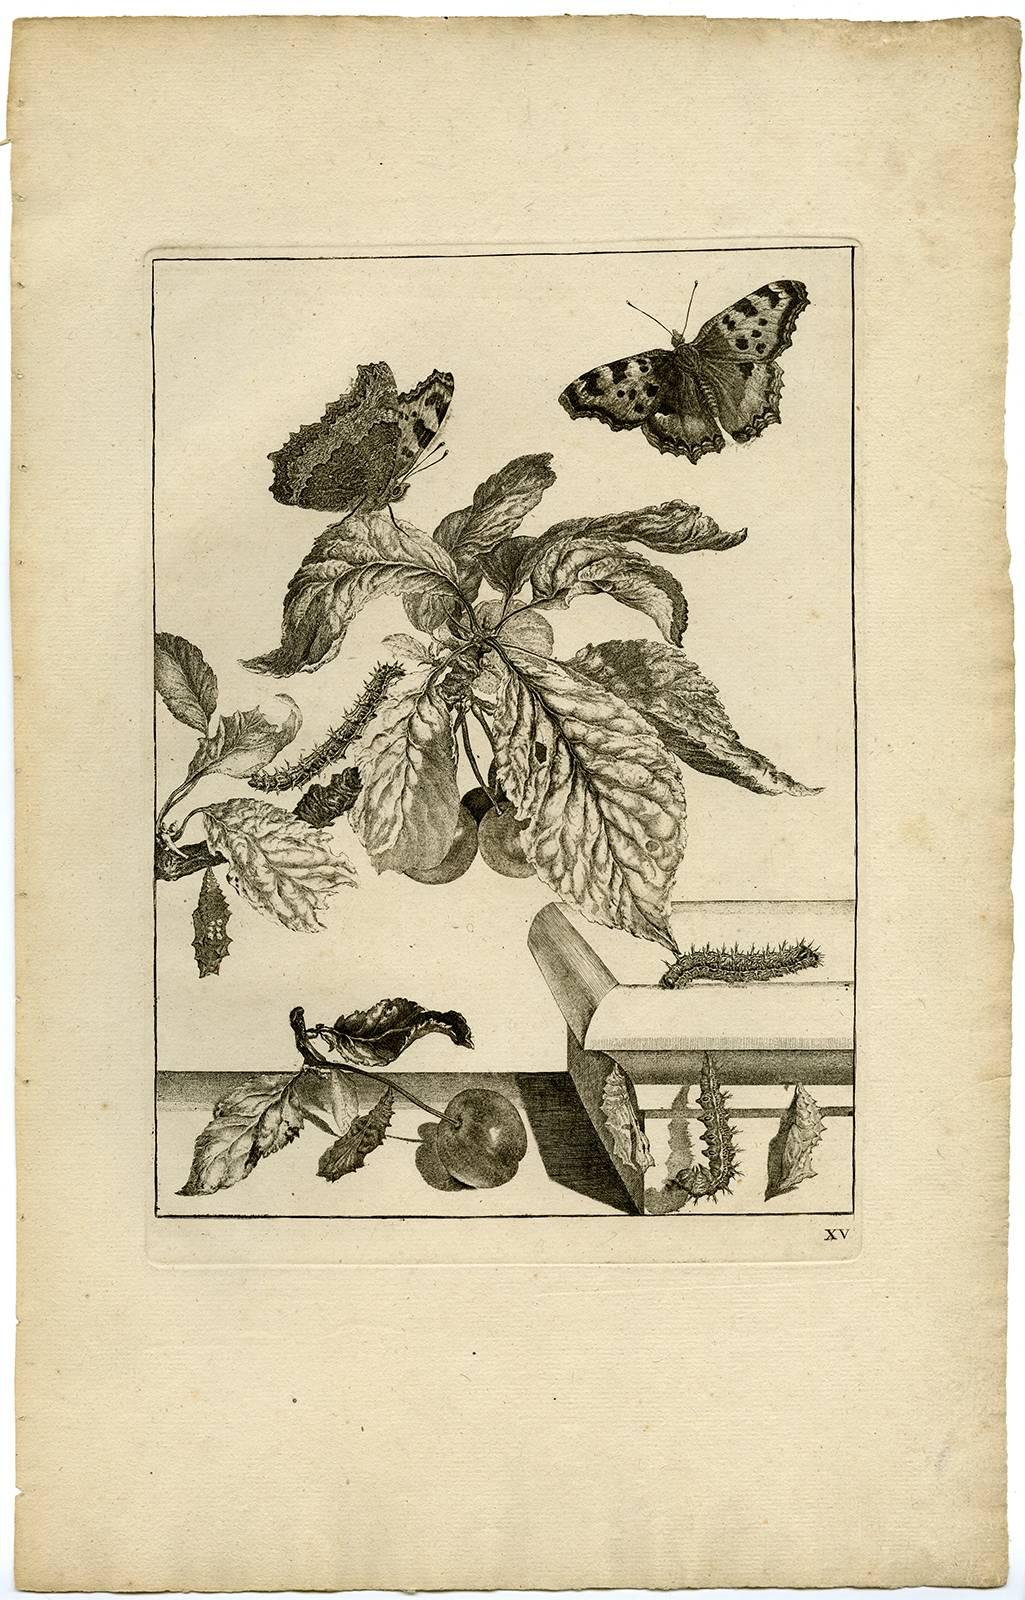 Jacob L'Admiral Print - Untitled - Branch of a cherry tree with caterpillars and butterflies.